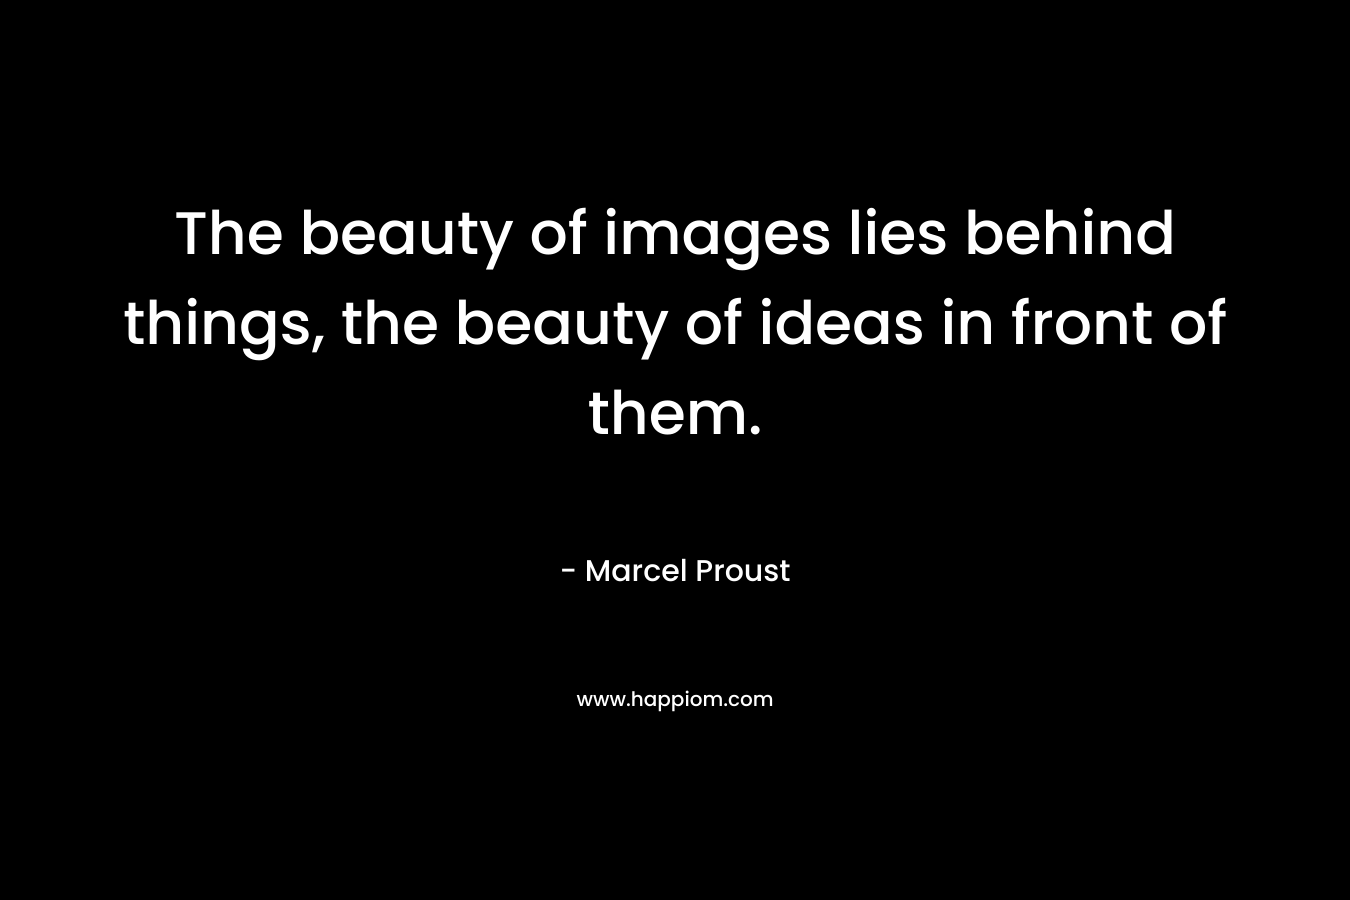 The beauty of images lies behind things, the beauty of ideas in front of them. – Marcel Proust